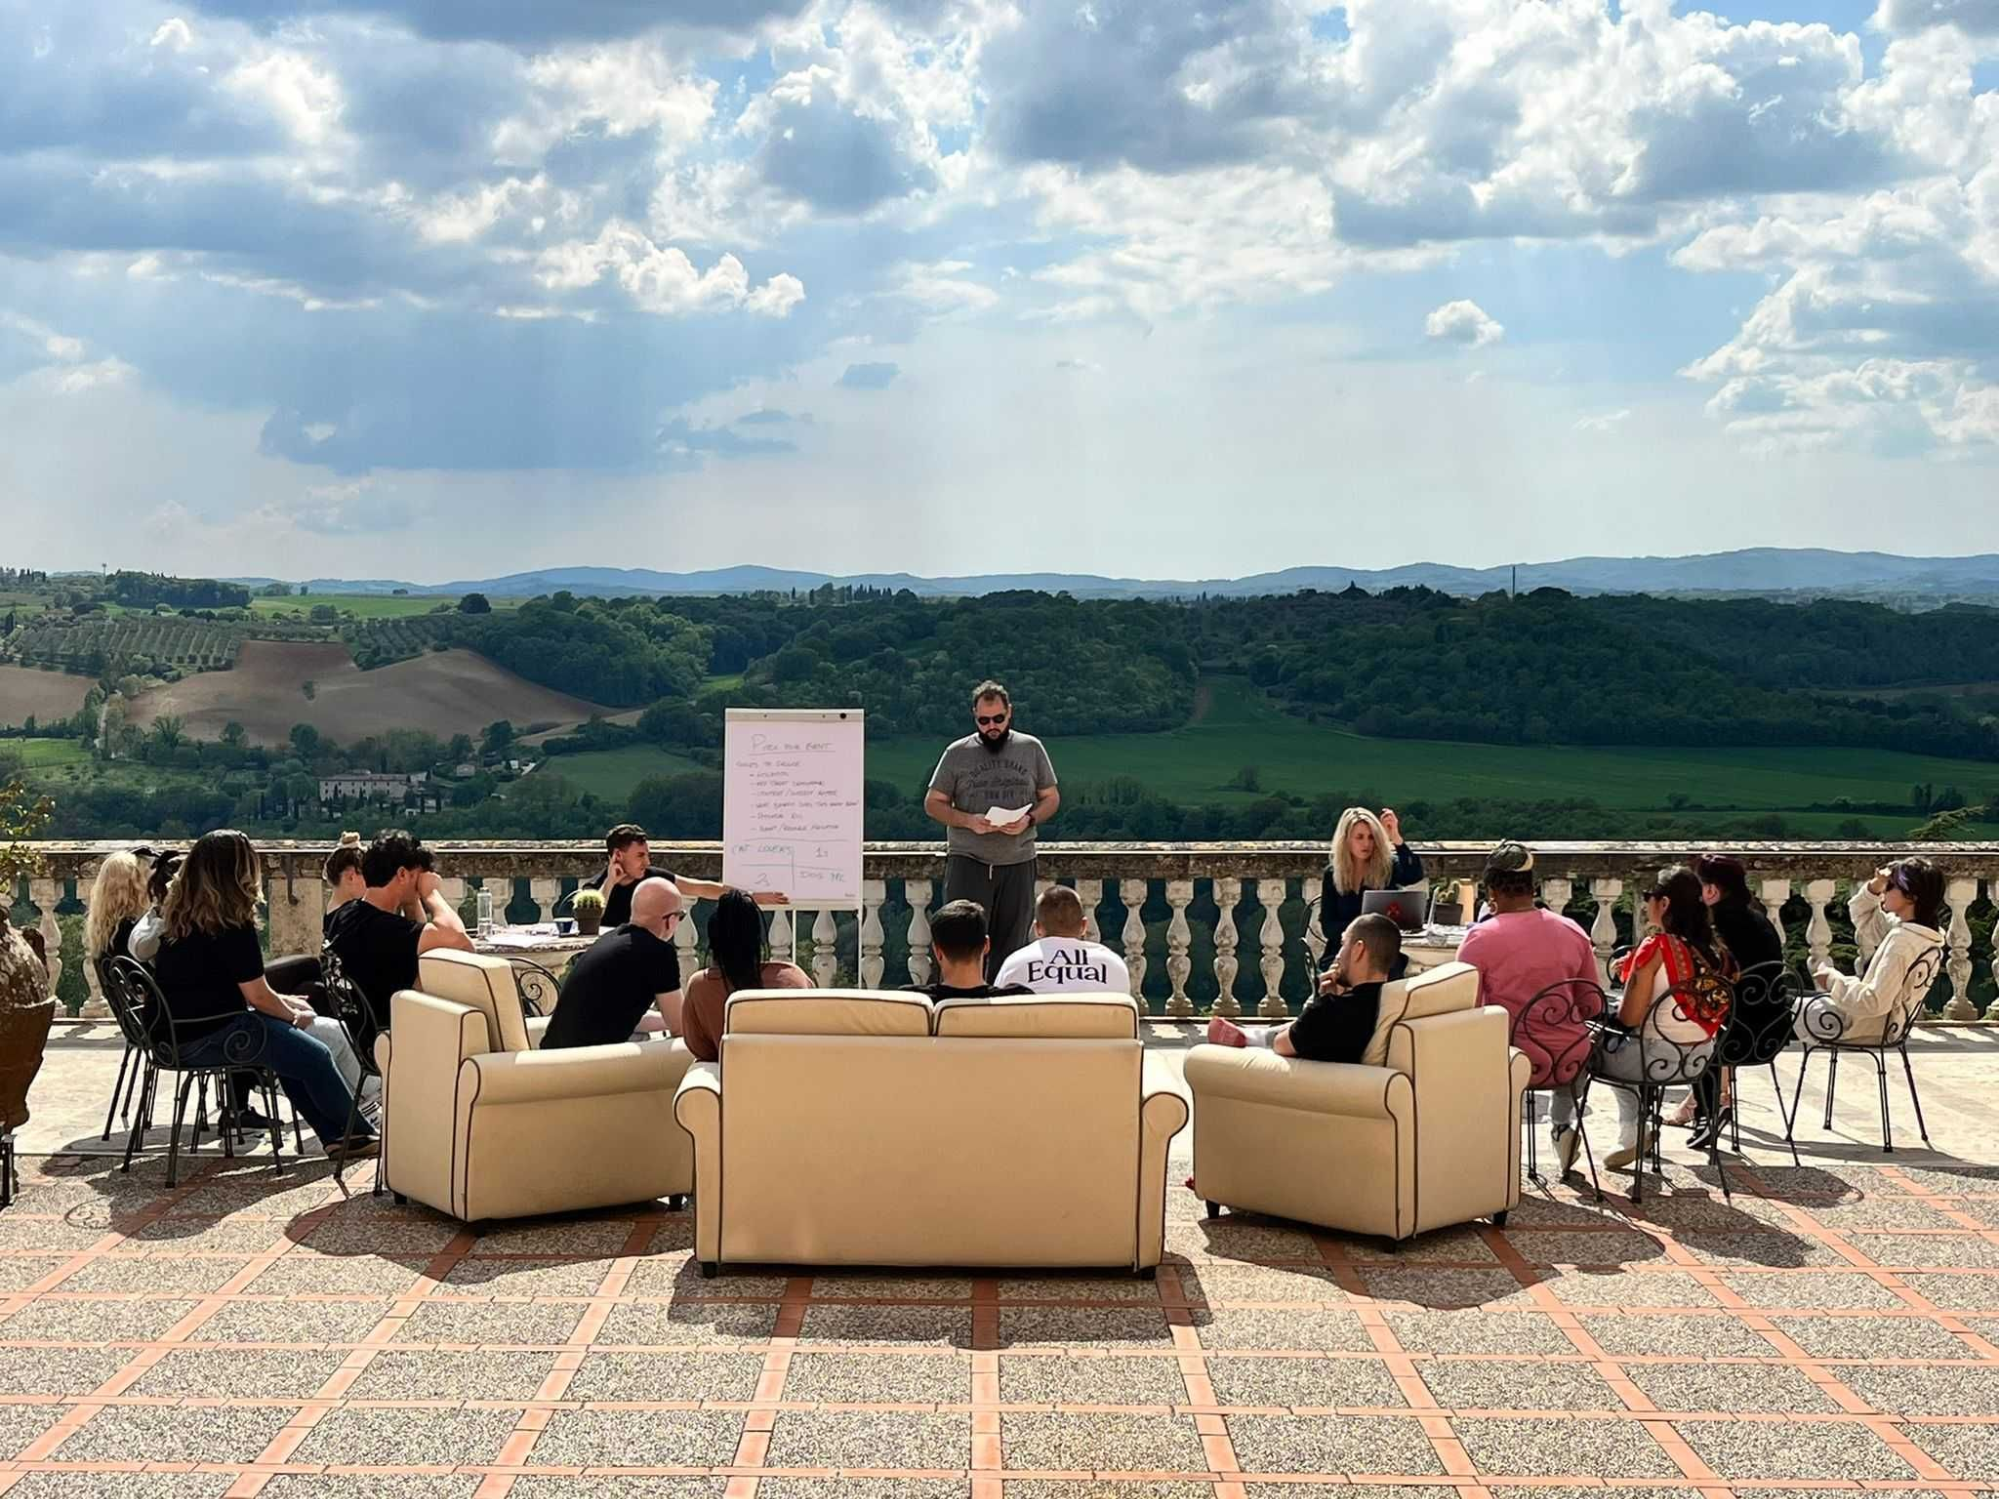 A brainstorm session during Match offsite in Tuscany. Check out mvpmatch.co/careers page to find out more about our benefits!